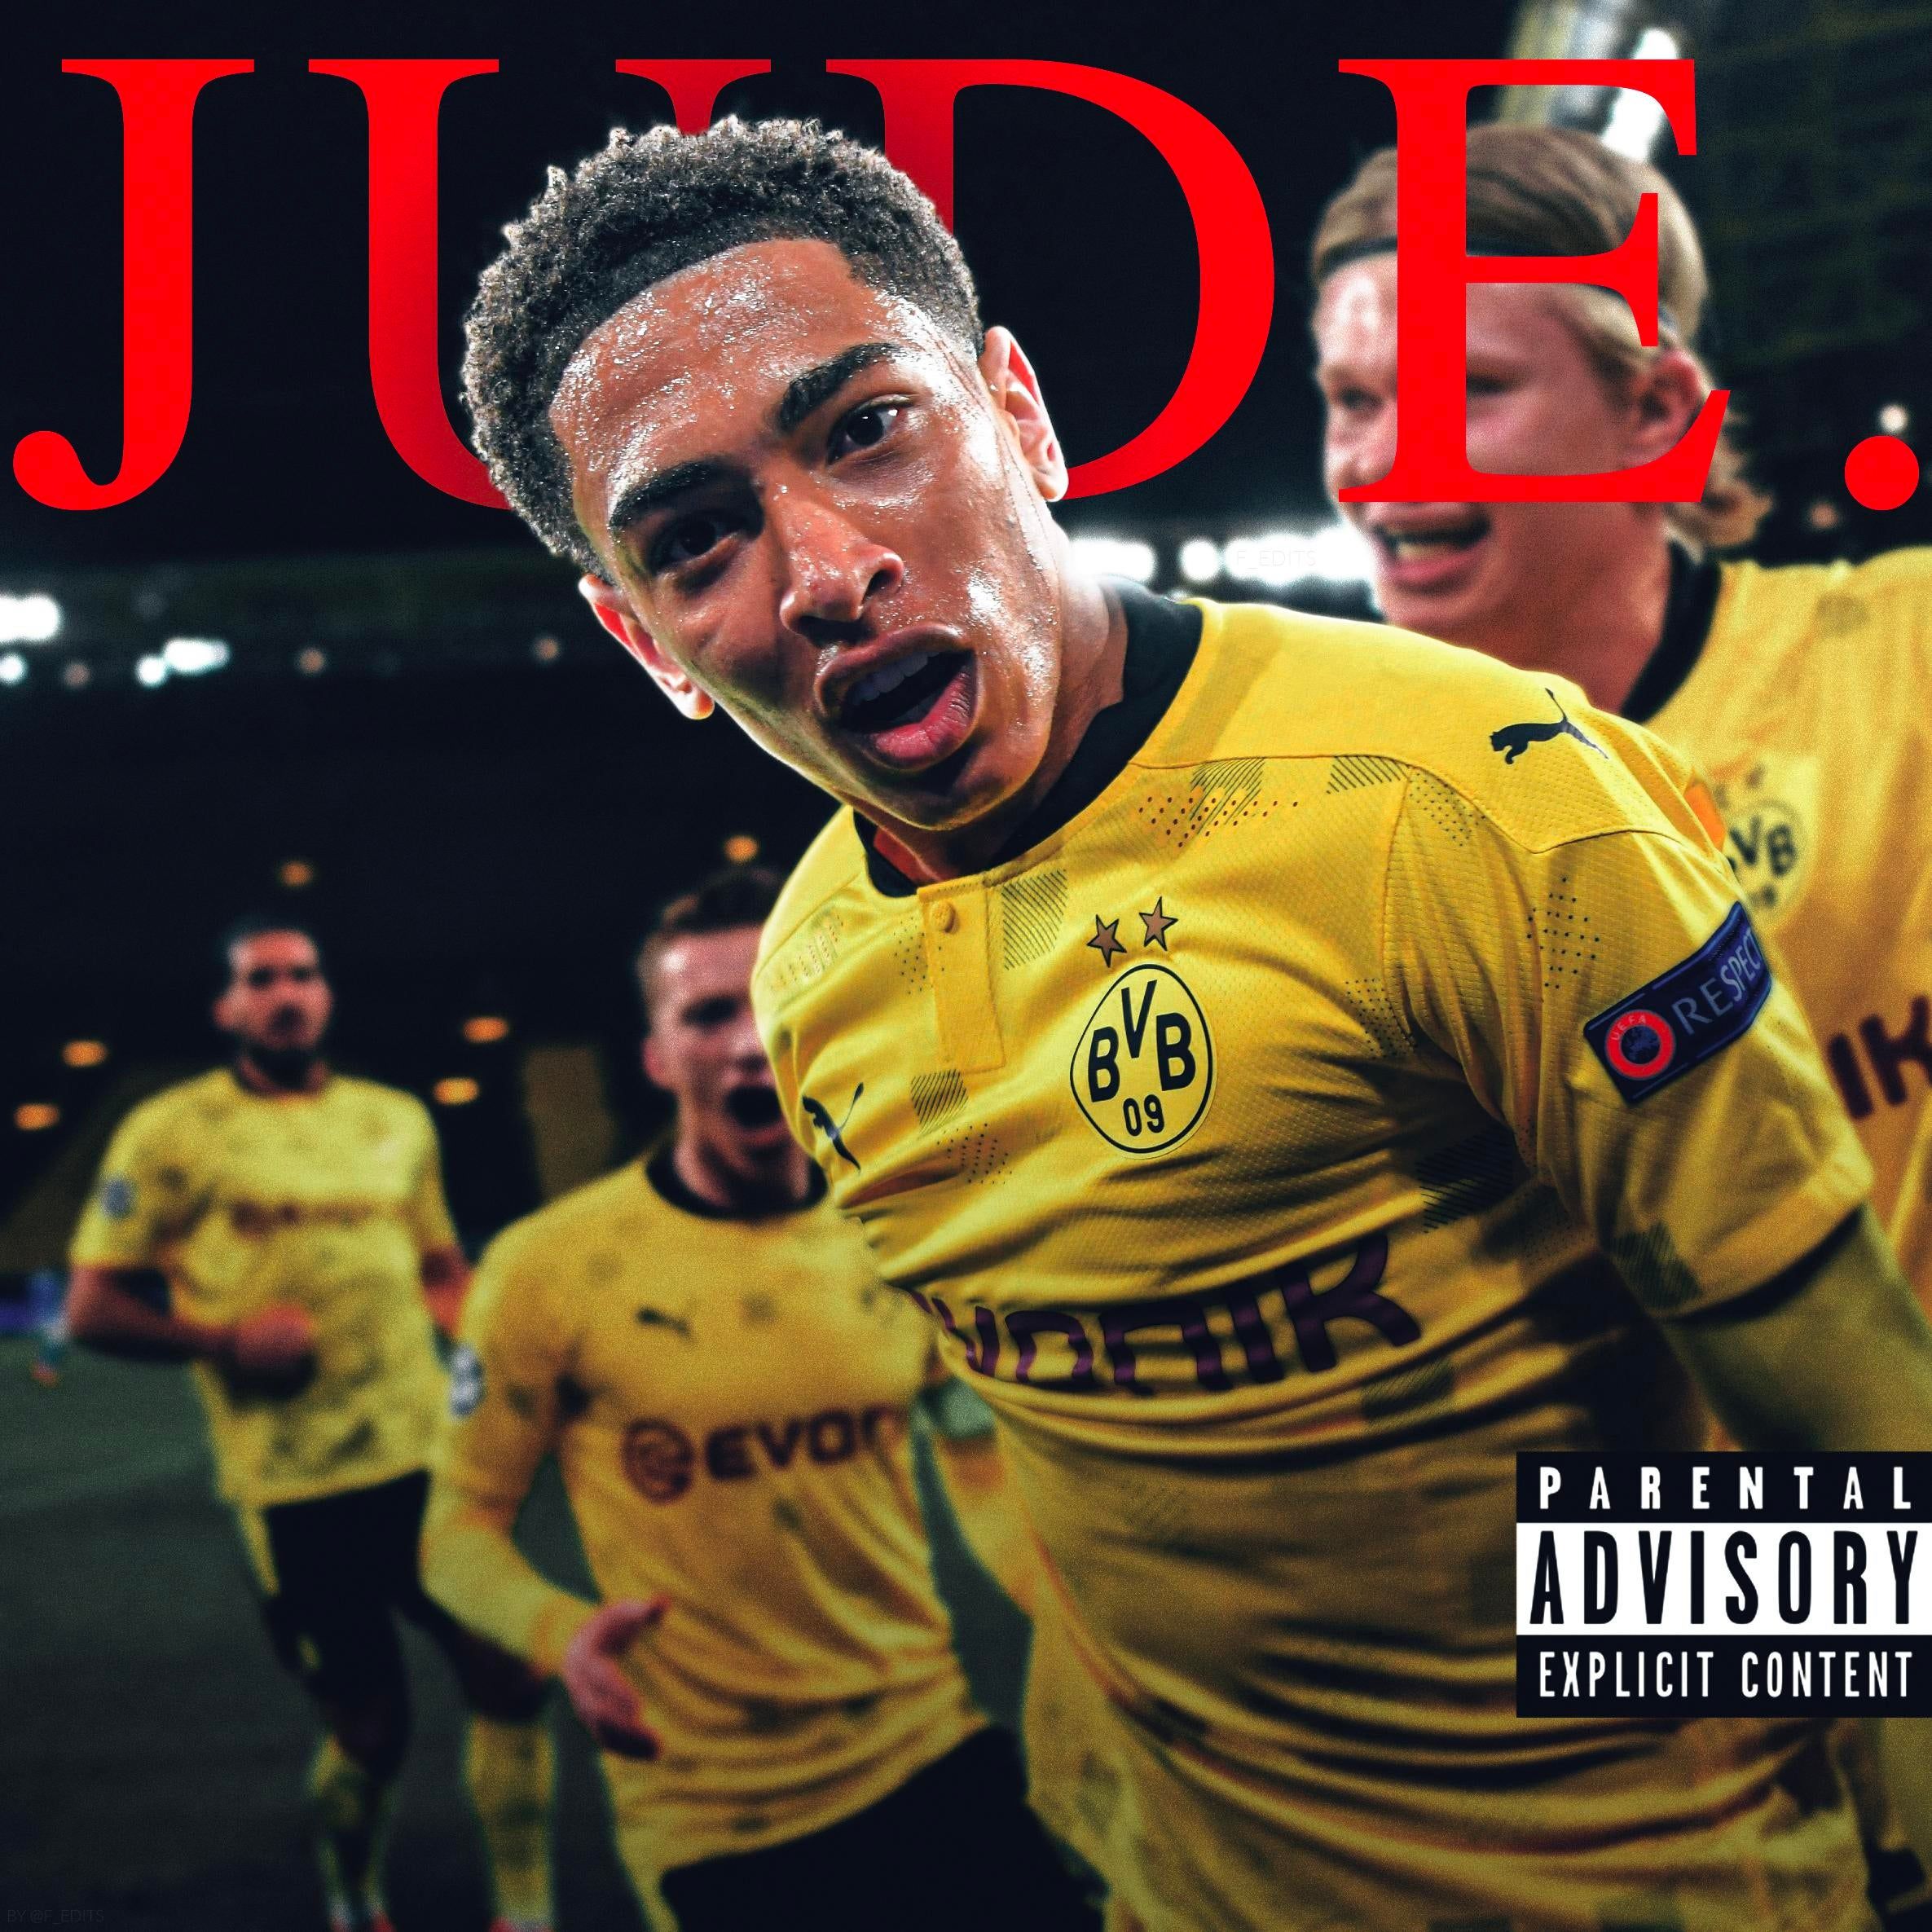 I took the Jude Bellingham picture and turned it into an album and FIFA cover